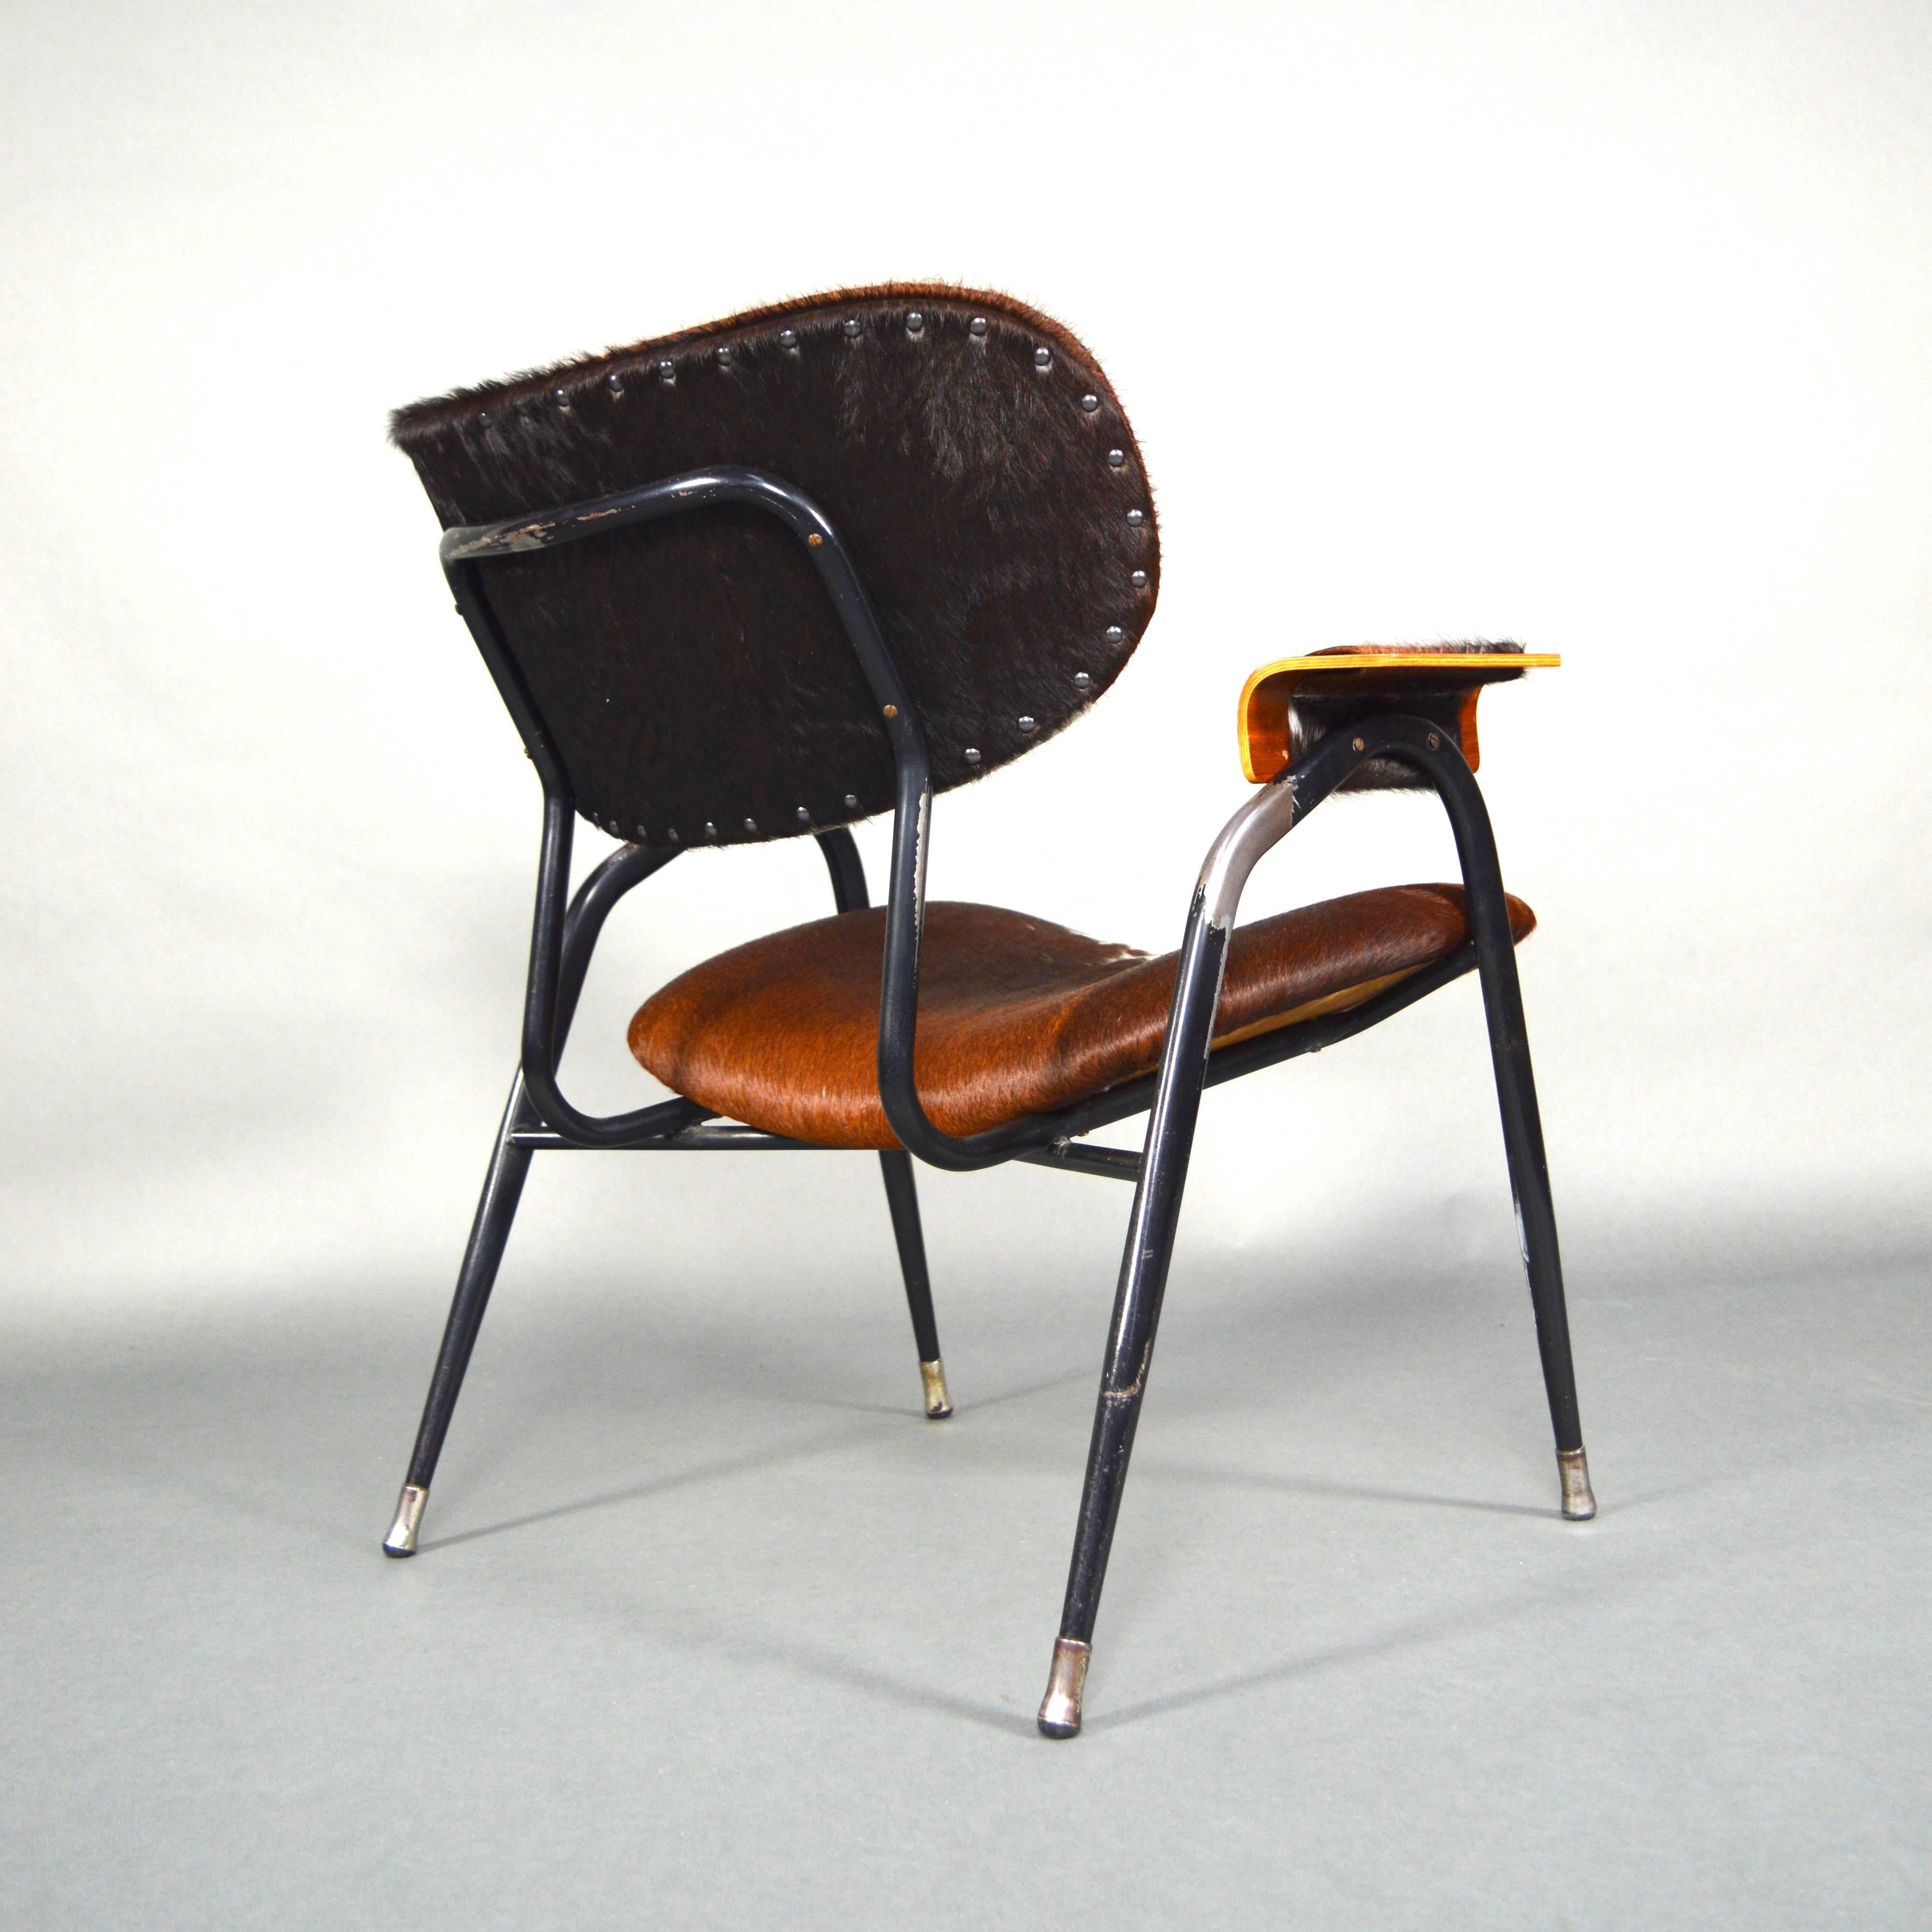 Rare model lounge chair by Gastone Rinaldi that has been reupholstered with a beautiful Cowhide leather.
The black lacquered metal base has signs of wear to the lacquer. 
